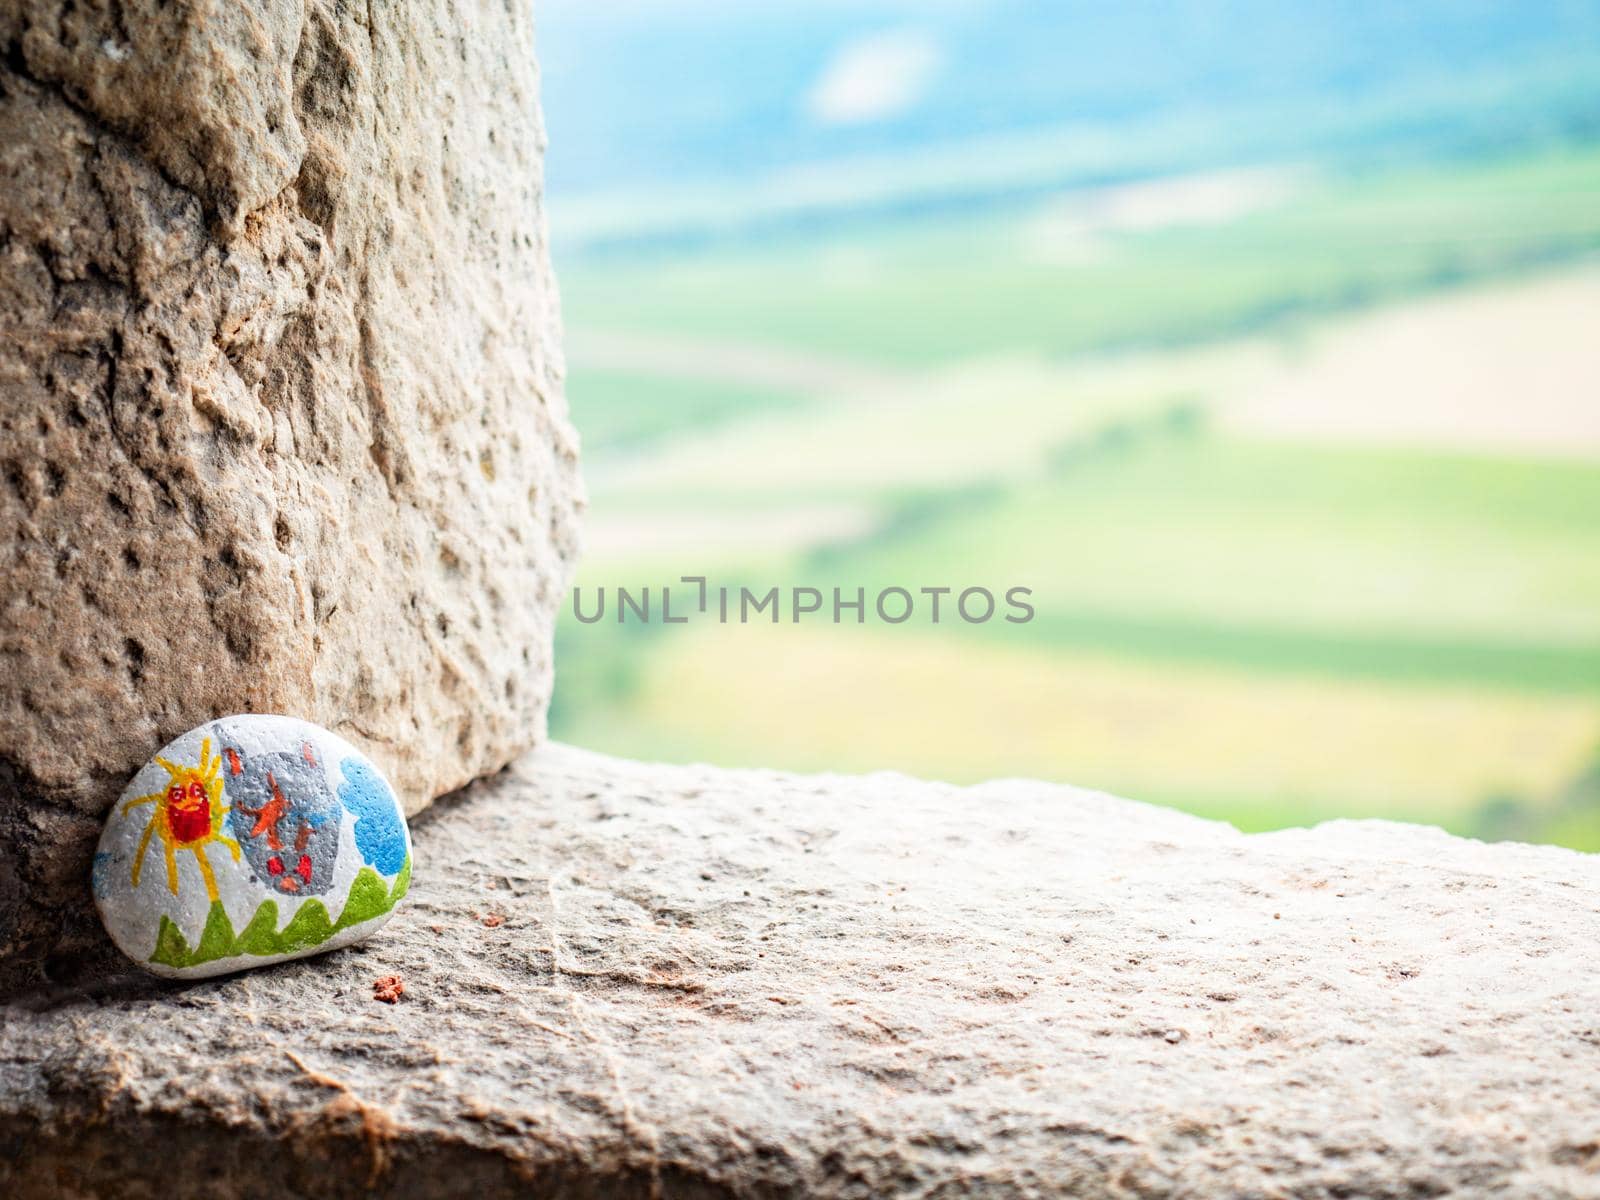 The picture painted on a stone is part of a children's tourist game. by rdonar2